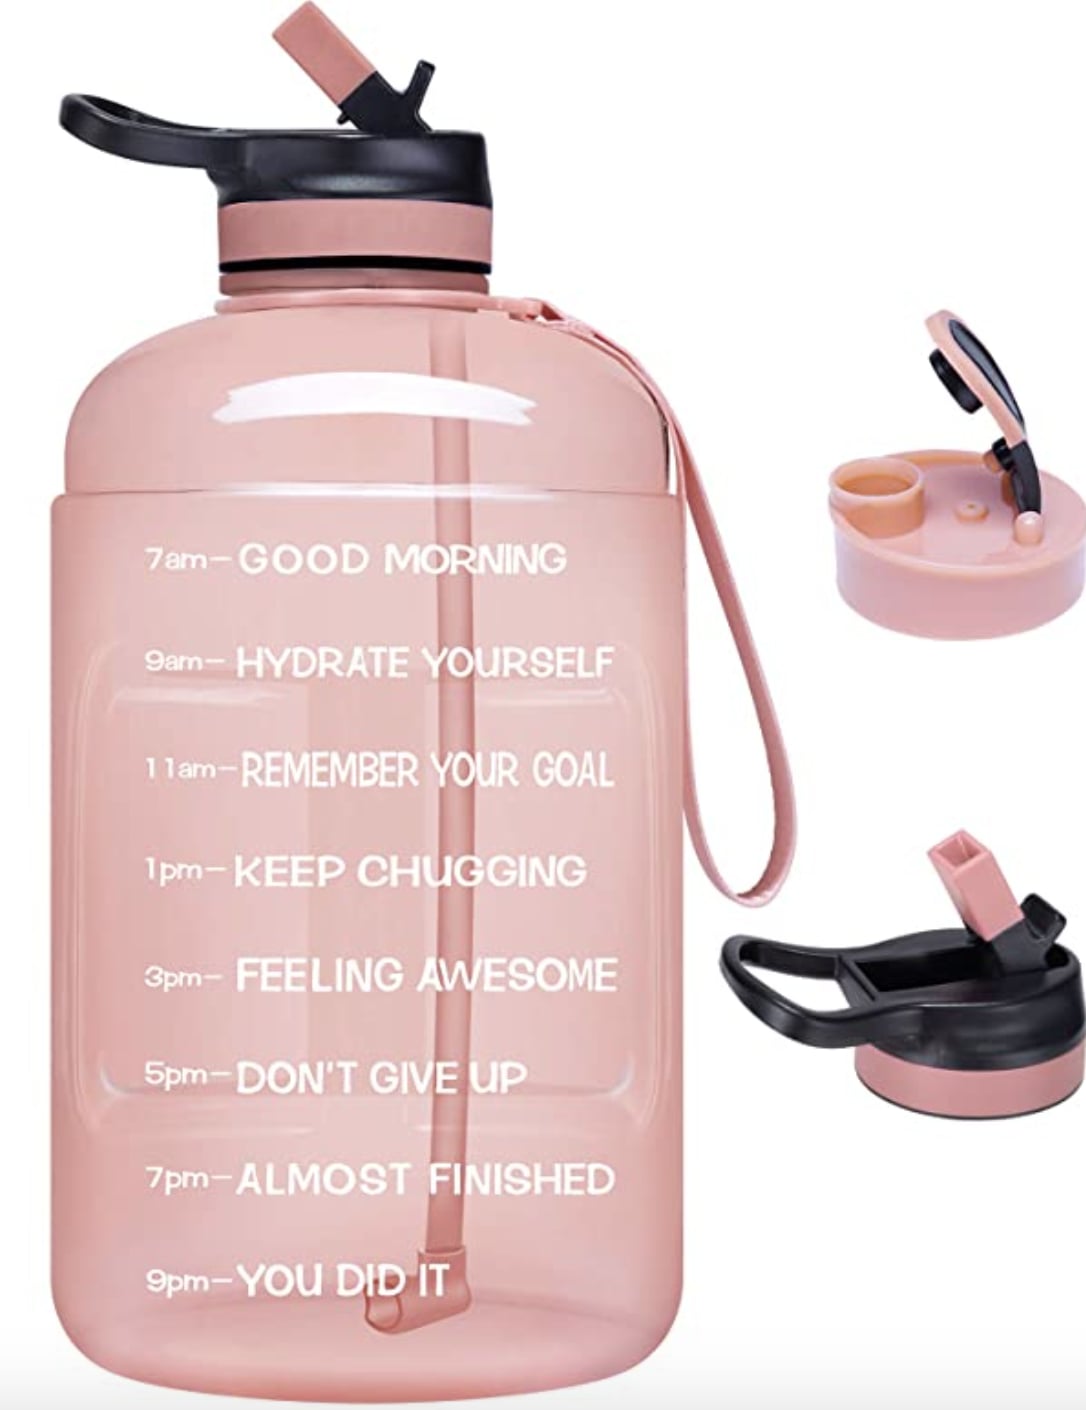 Cute Water Bottles: 20 Great Options You'll Want to Carry